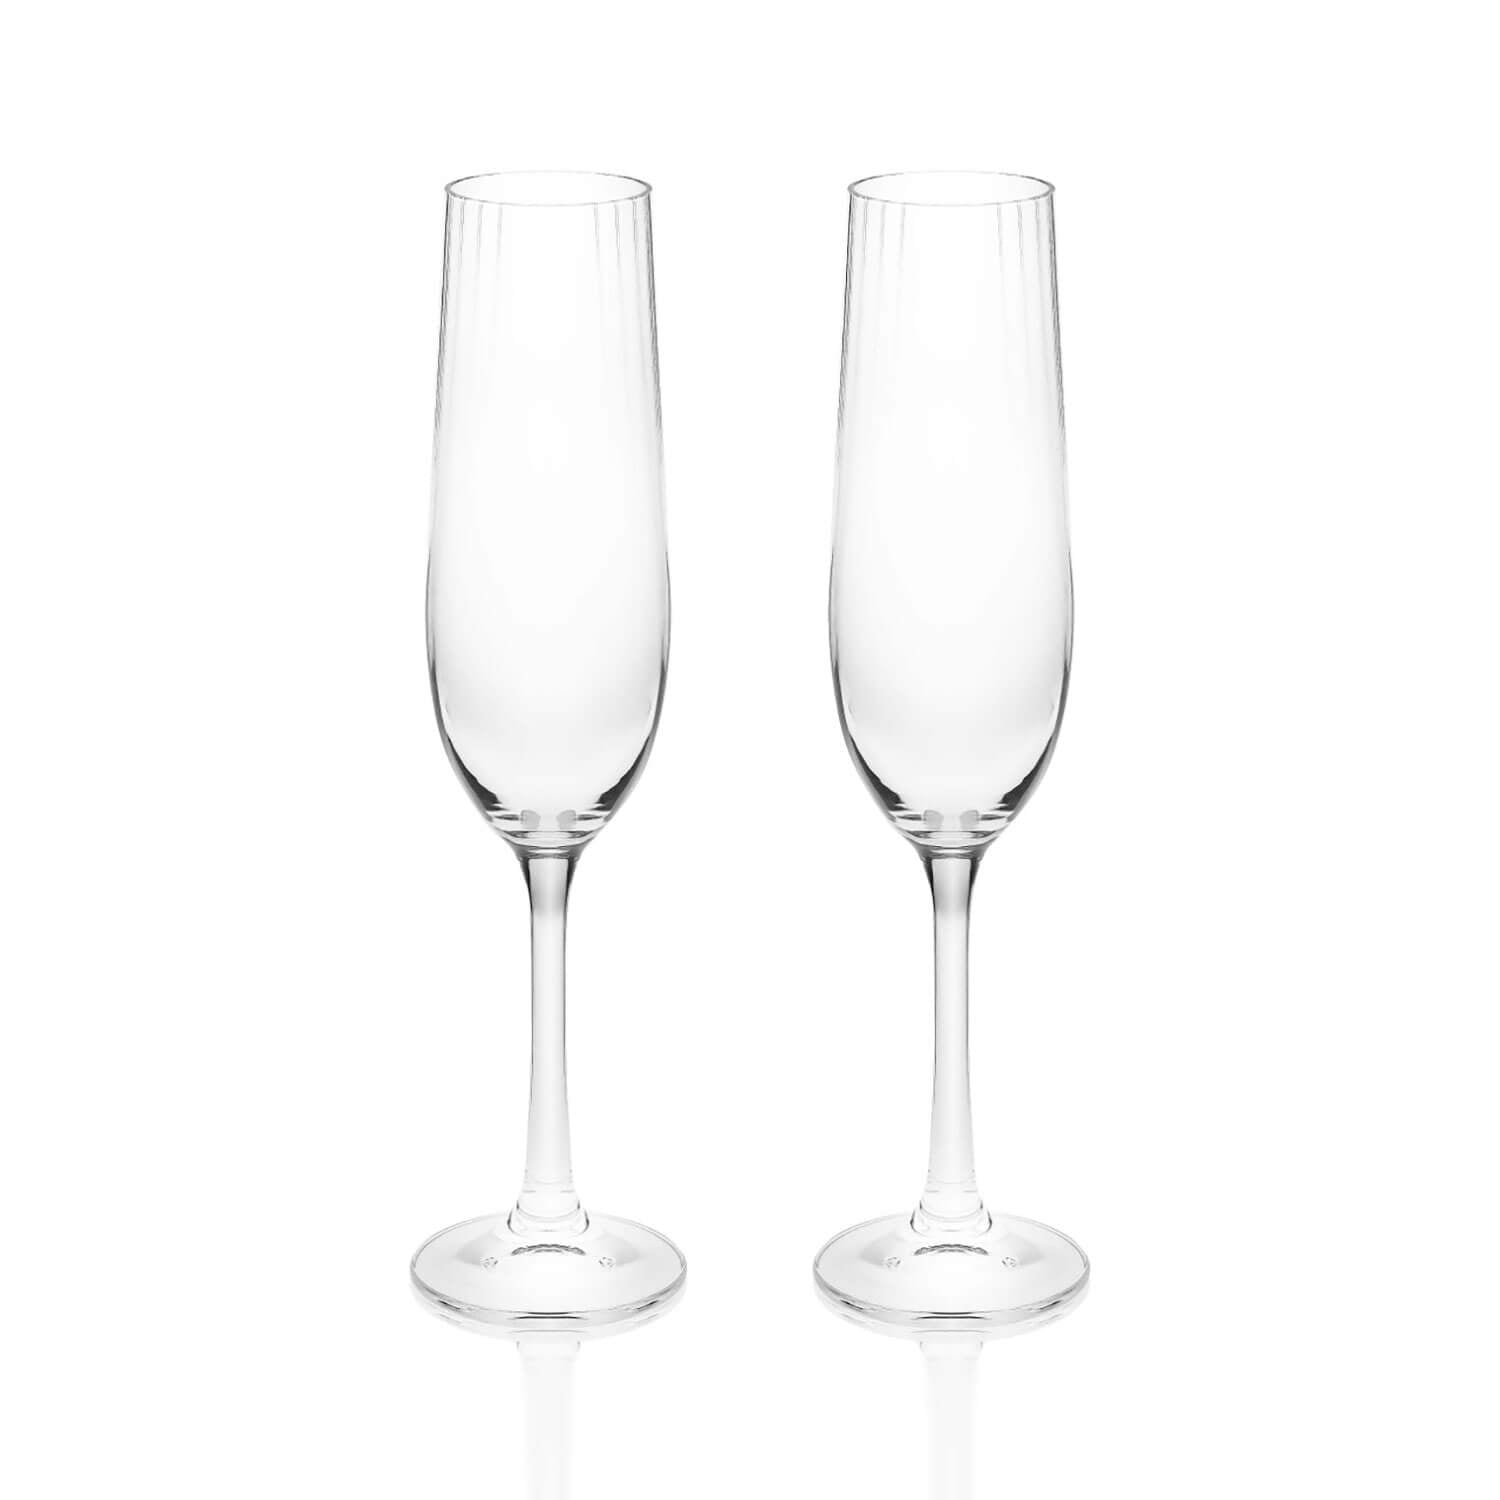 Tipperary Crystal Ripple Set of 2 Champagne Glasses 1 Shaws Department Stores